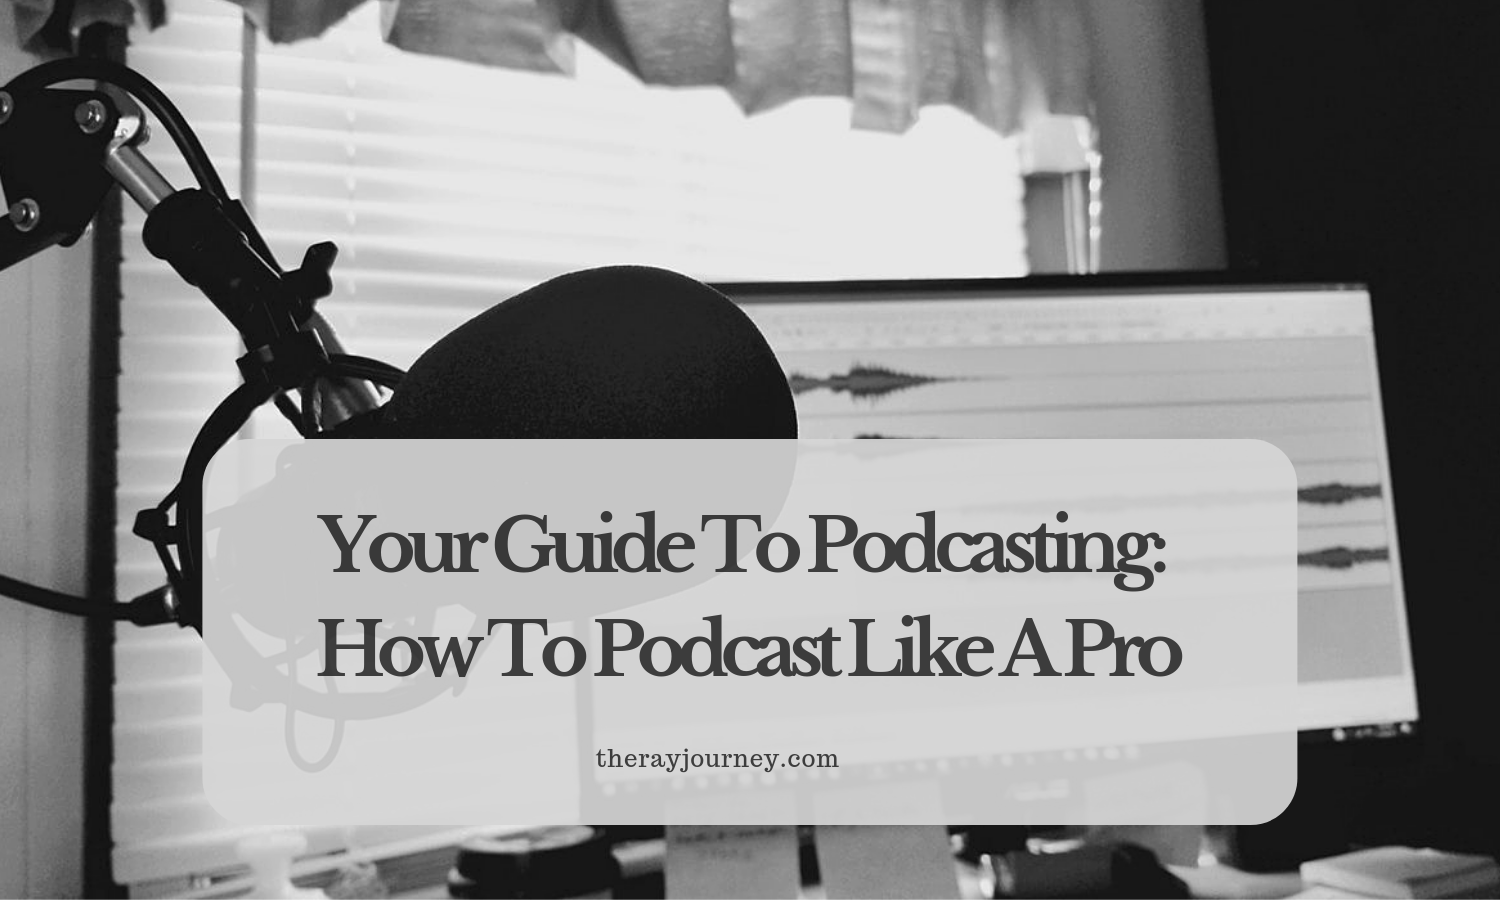 Your Guide To Podcasting: How To Podcast Like A Pro